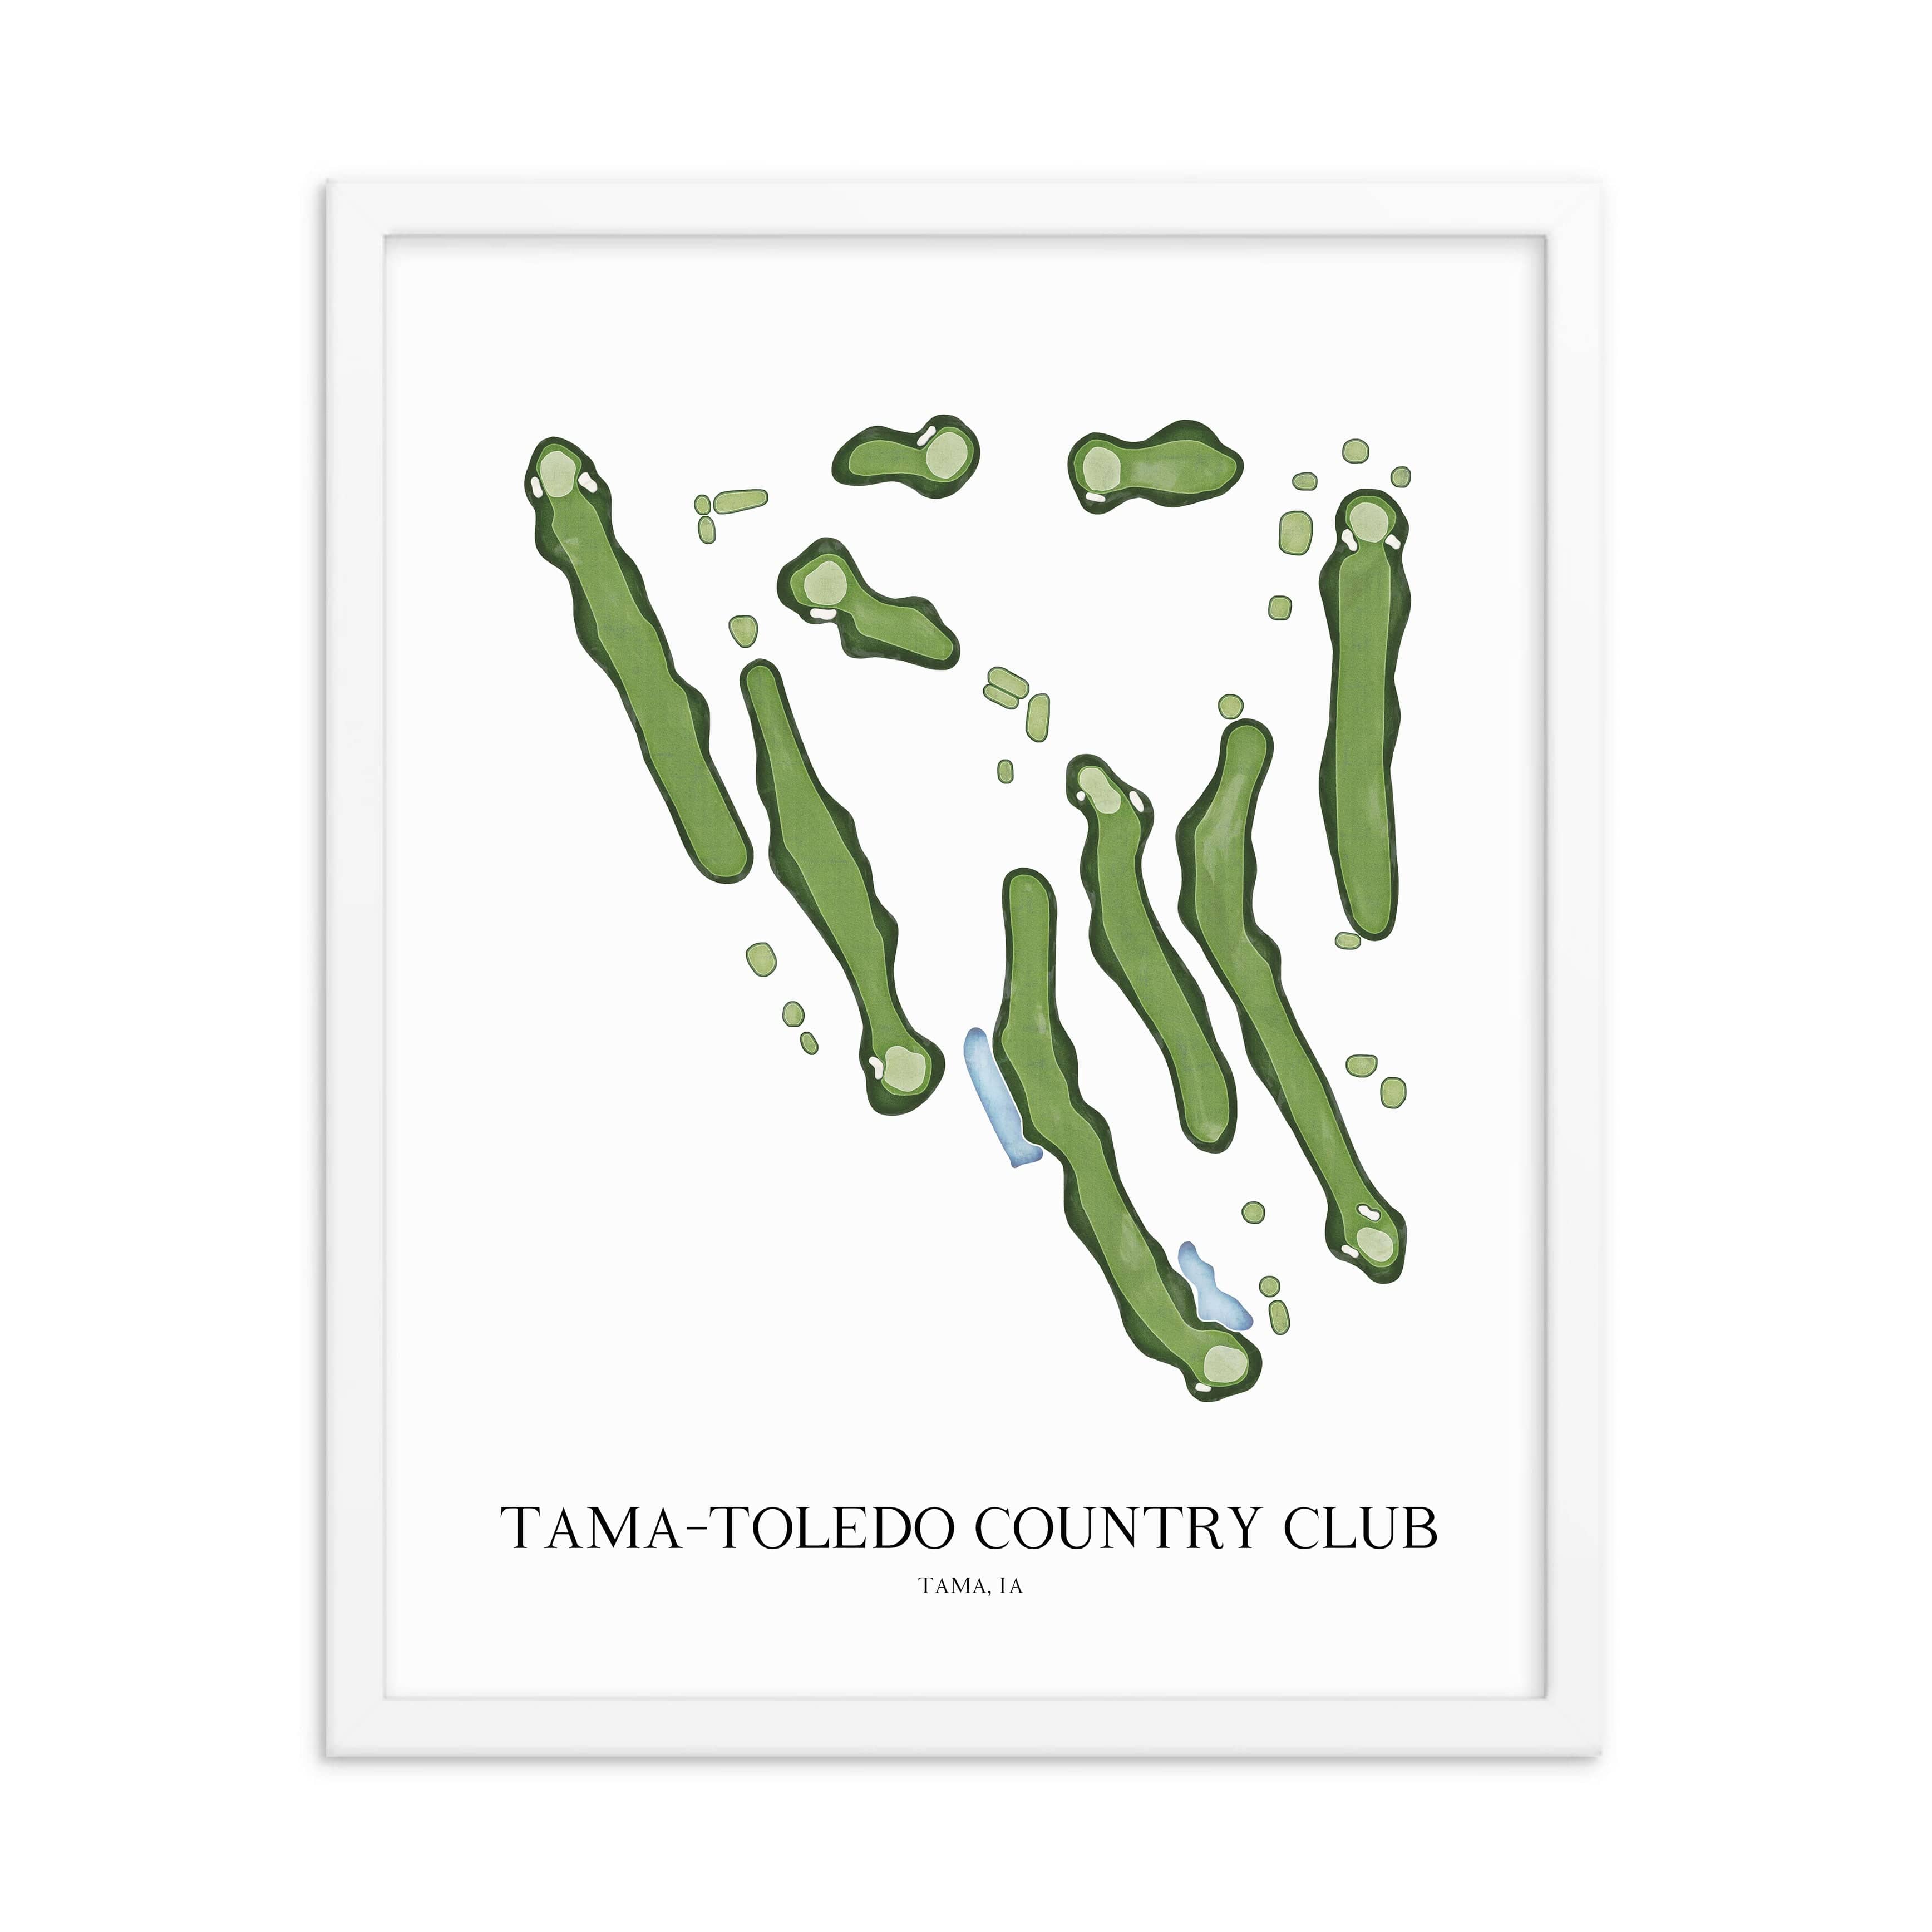 The 19th Hole Golf Shop - Golf Course Prints -  Tama-Toledo Country Club Golf Course Map